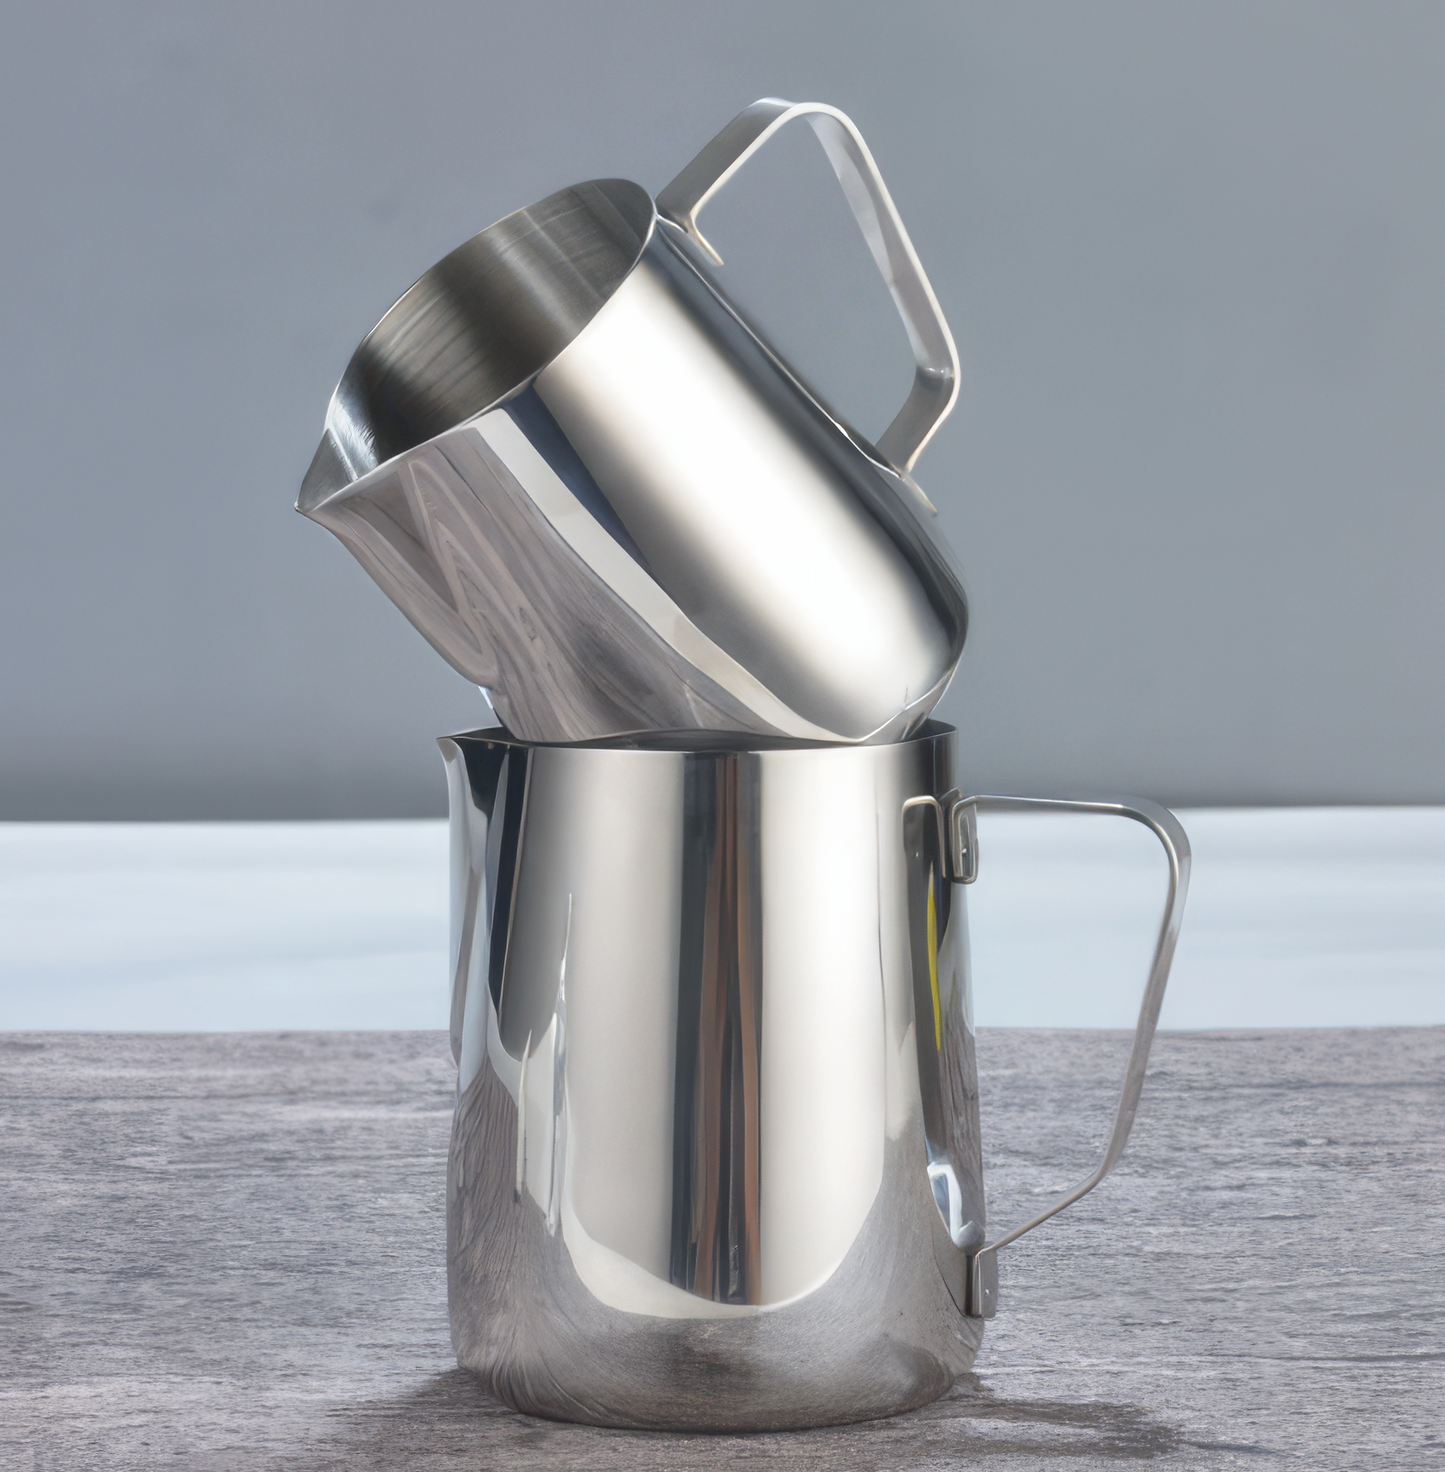 Stainless Steel Coffee Frothing Pitcher 150ML